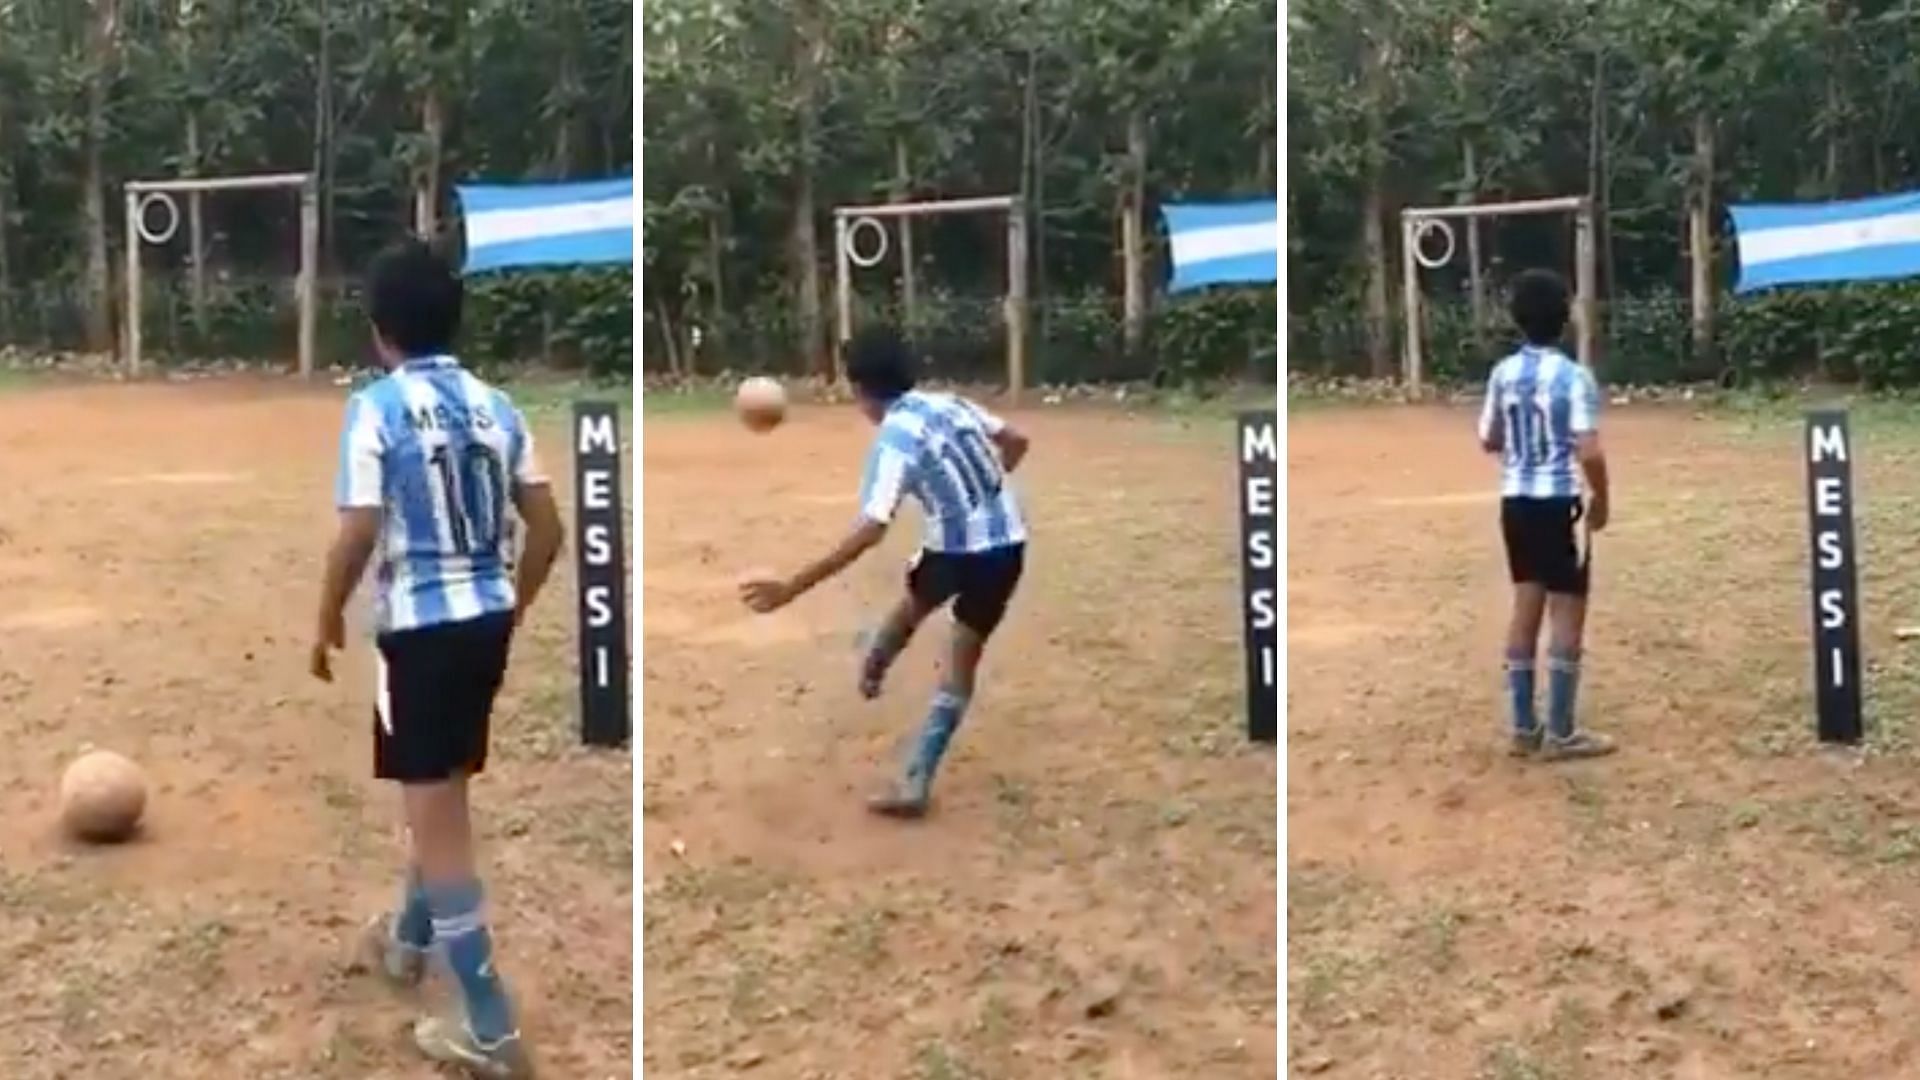 The video of a 12-year-old boy from Malappuram scoring a goal wearing a Messi jersey has gone viral.